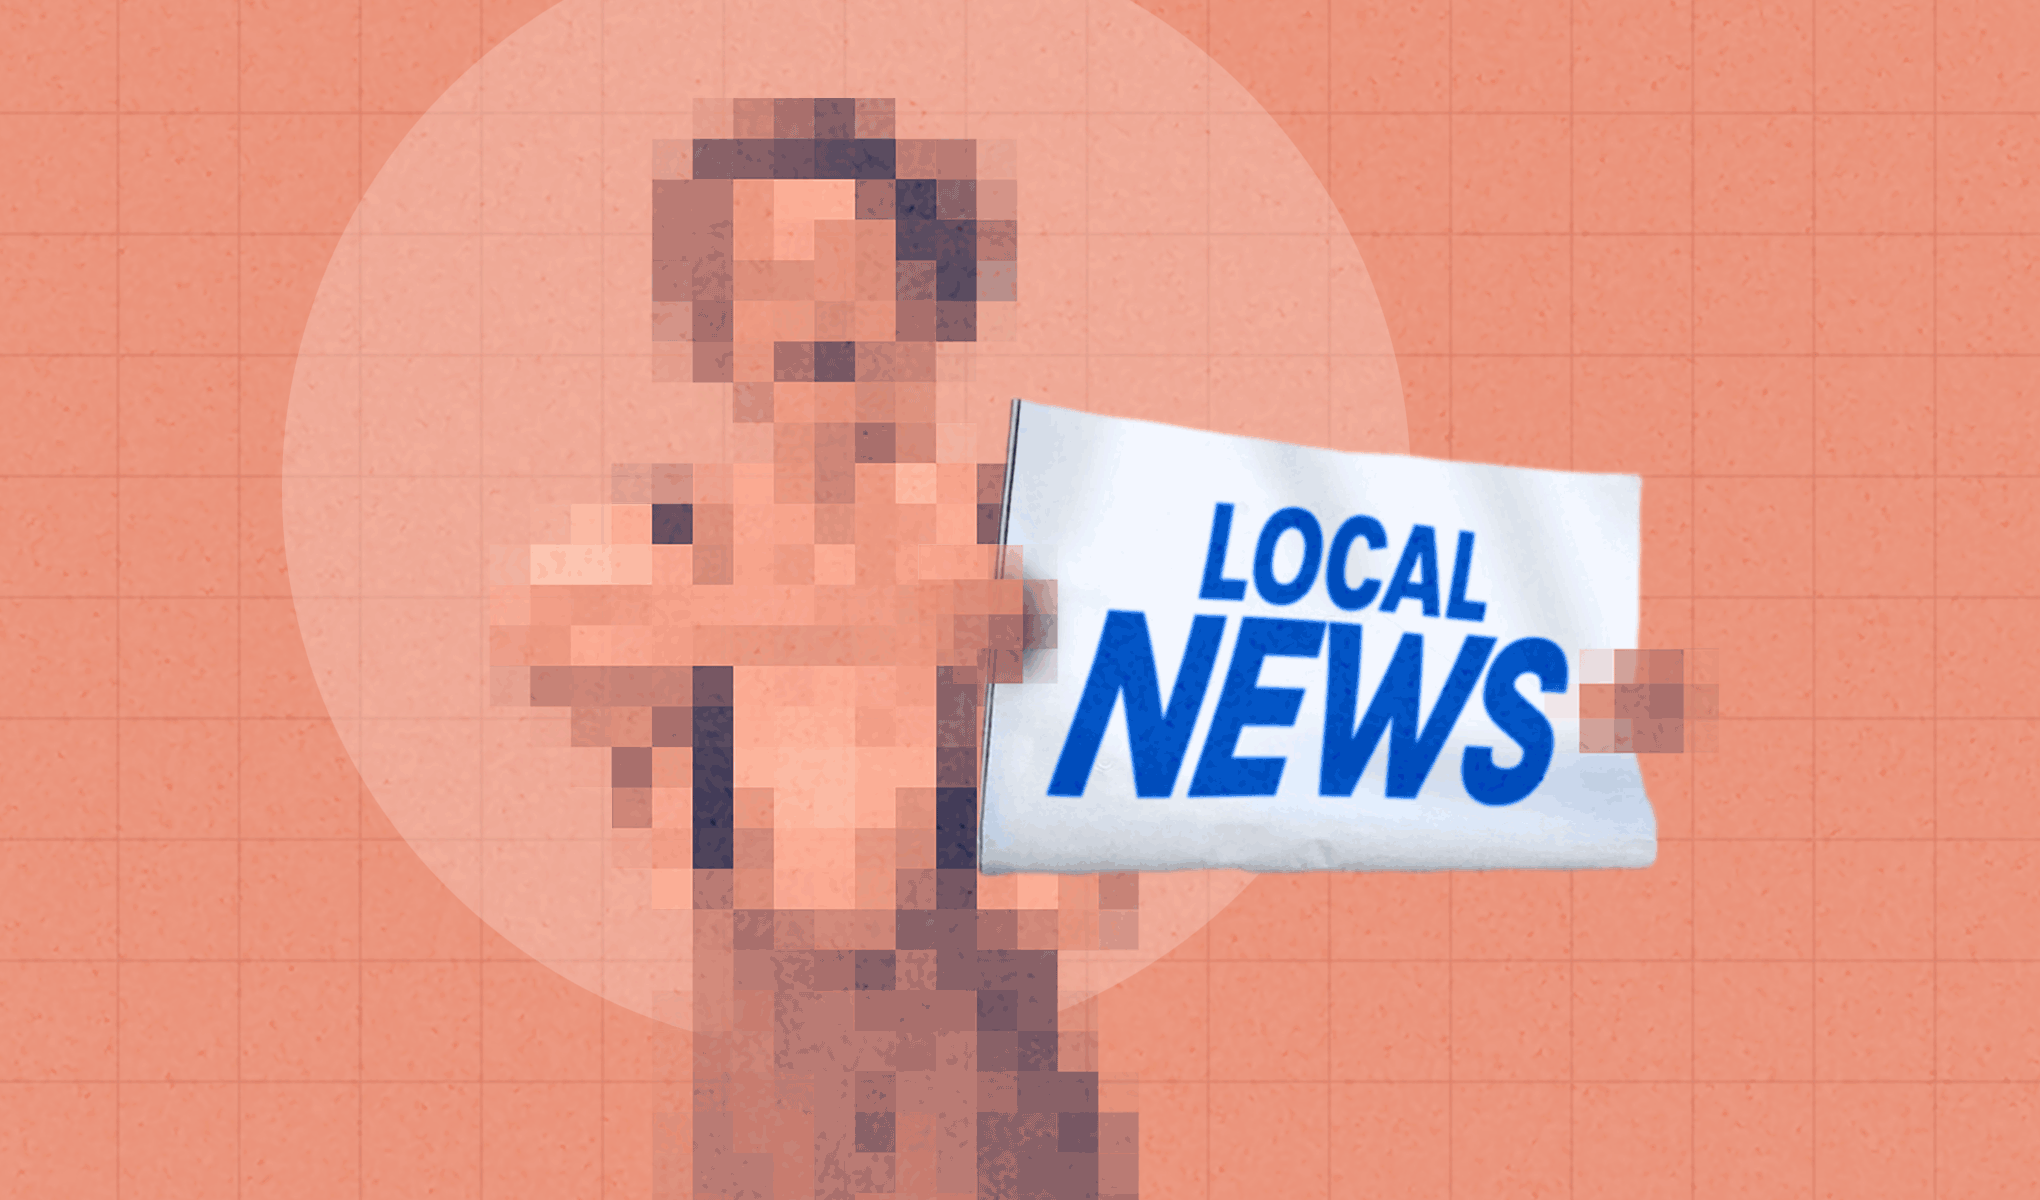 How Will AI Change Local News in the Next 5 Years?